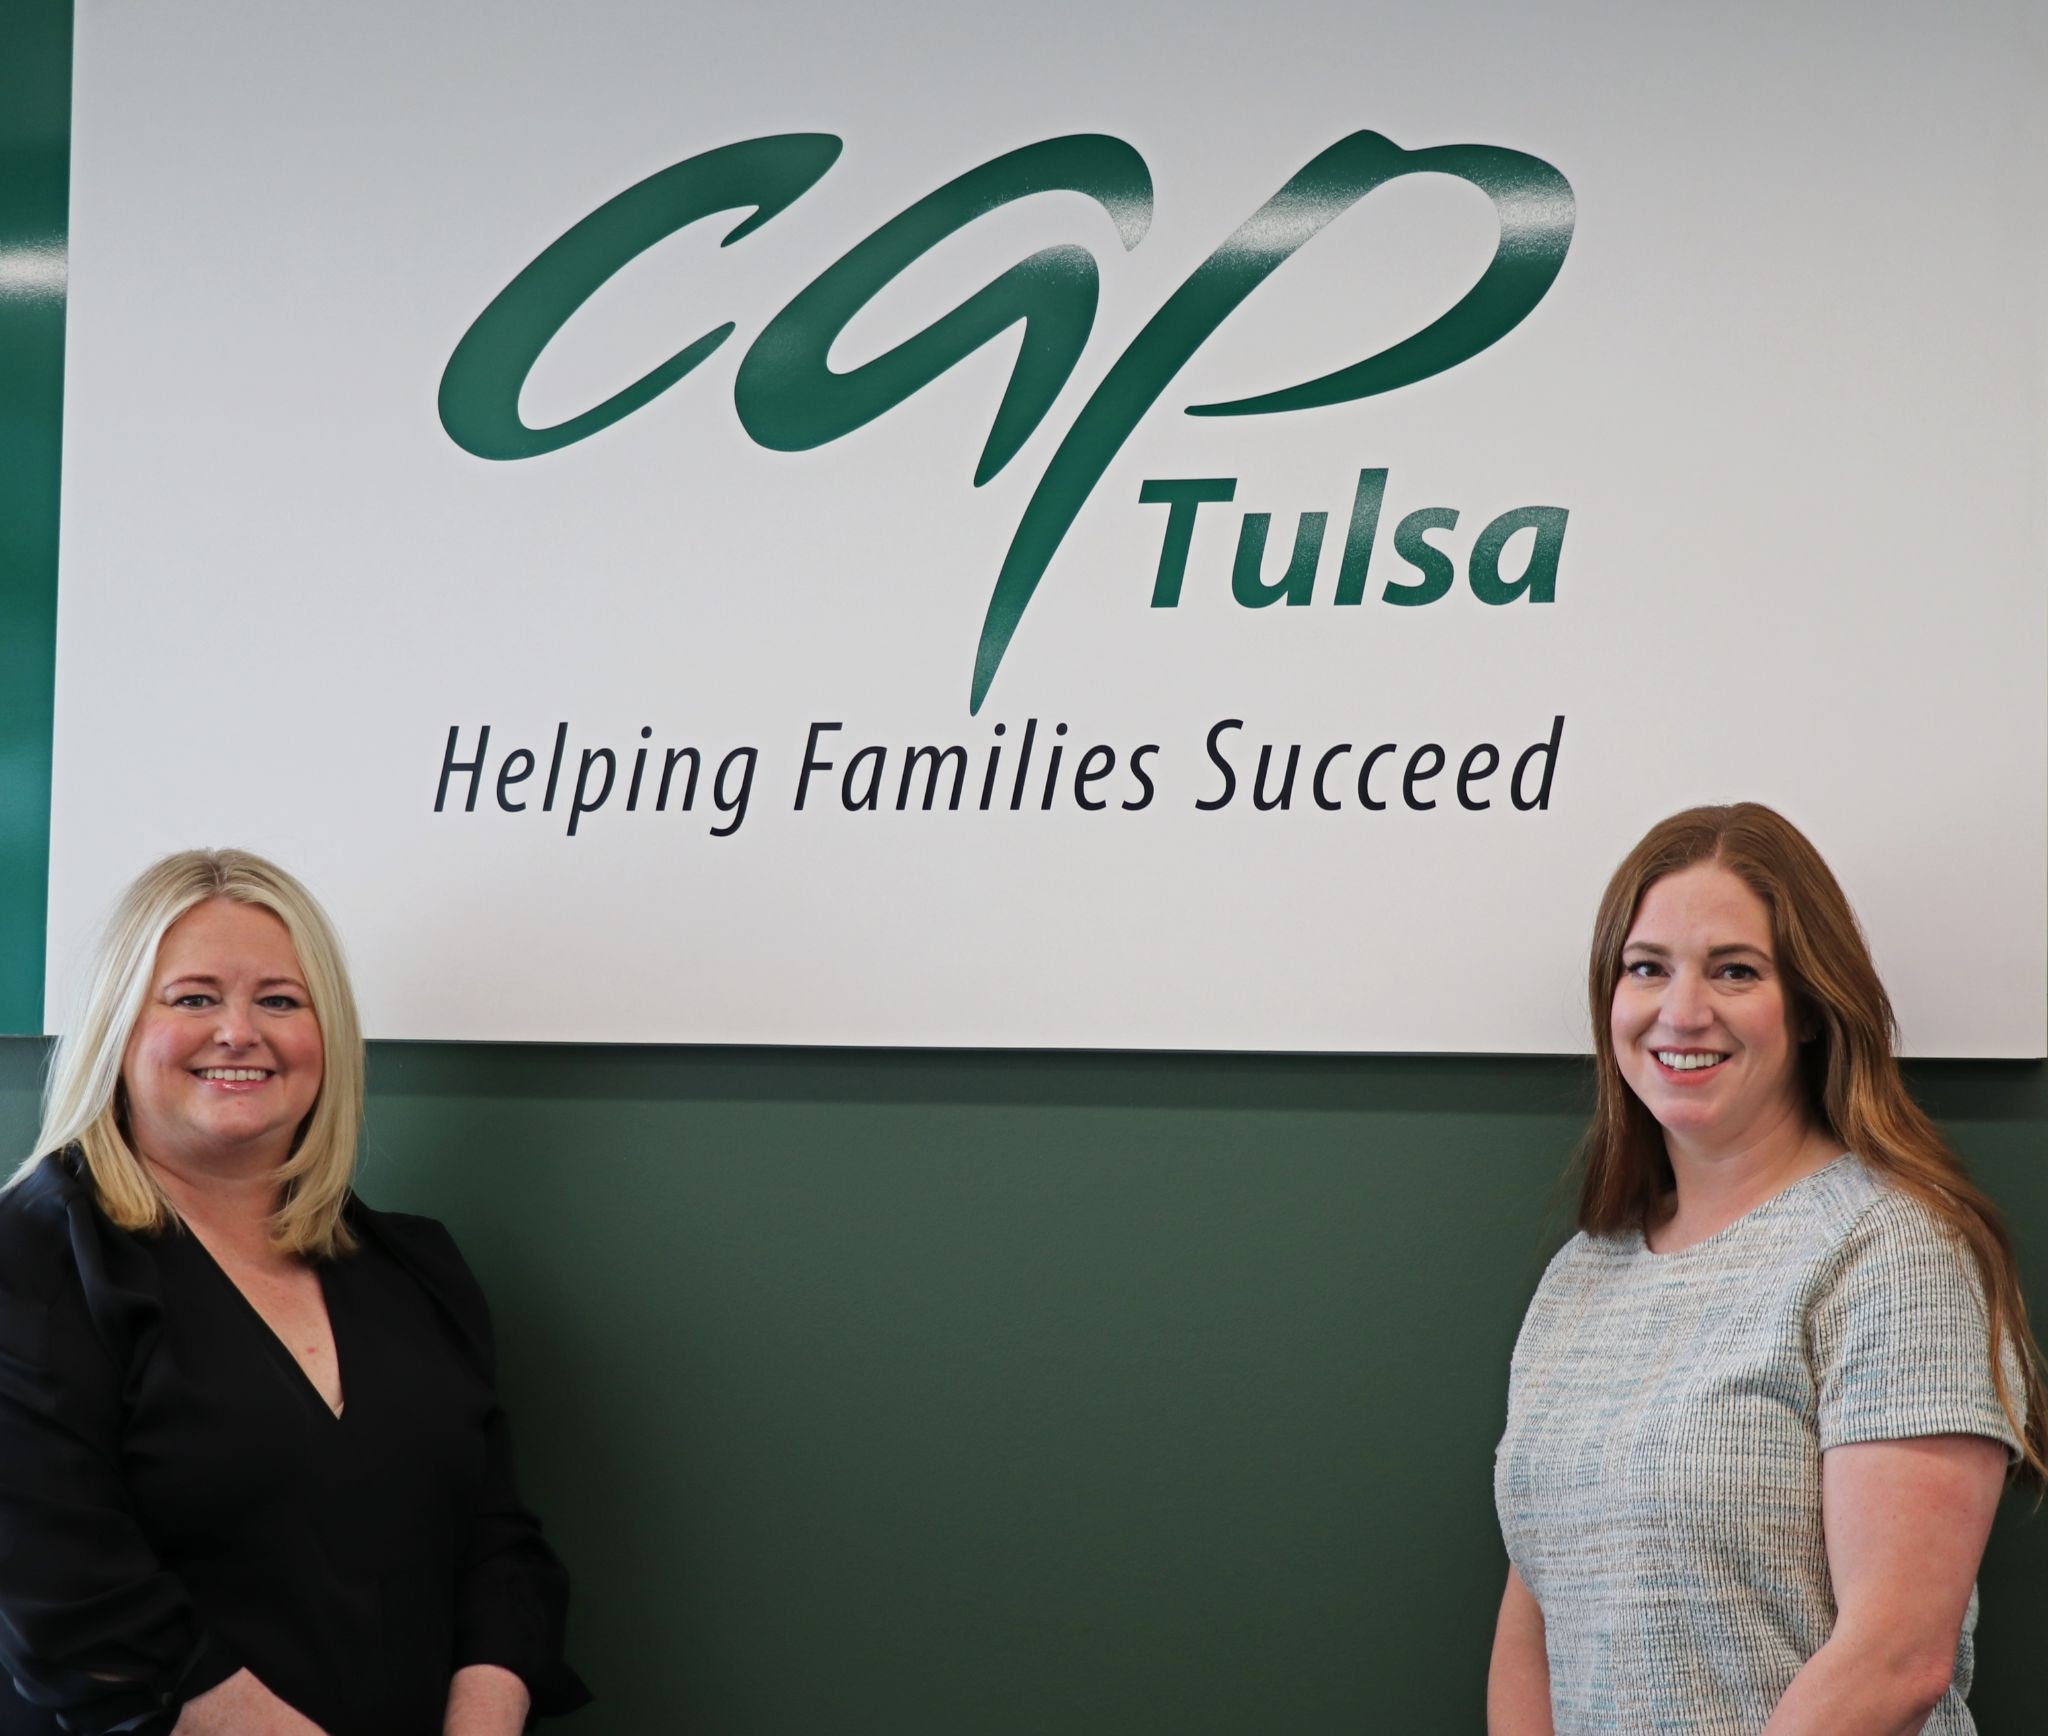 Family-Centered Emergency Assistance at CAP Tulsa